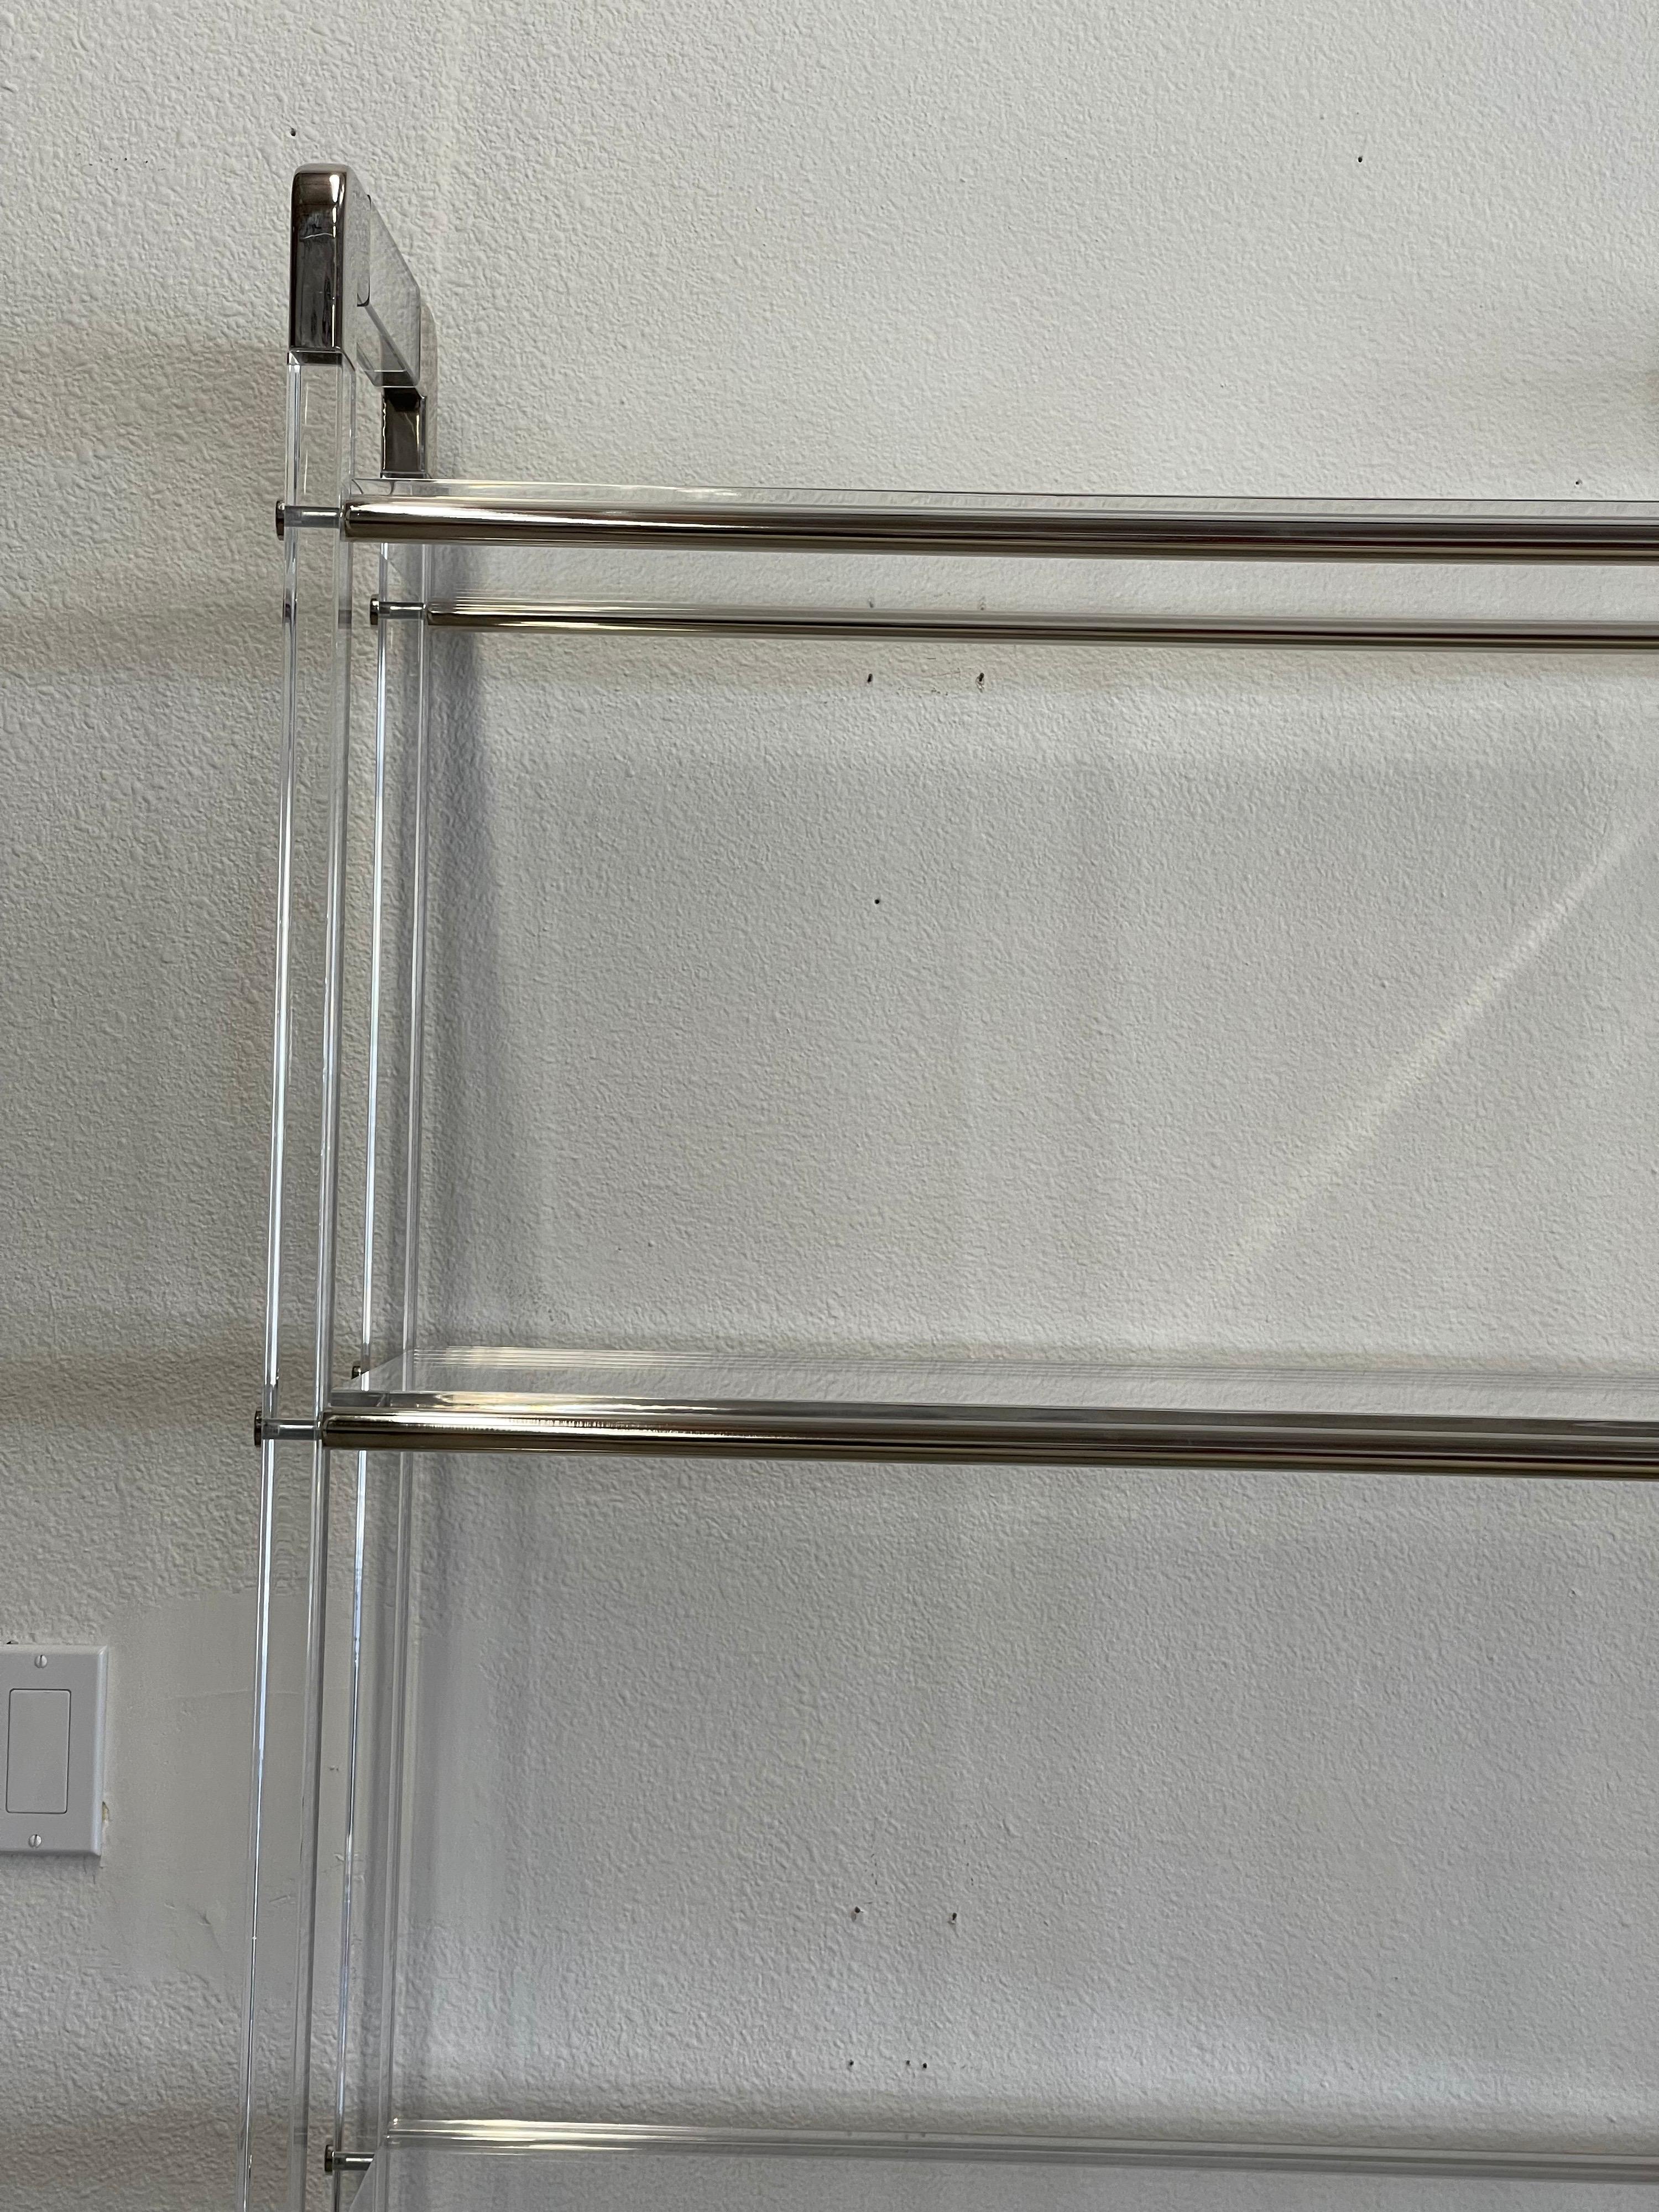 Charles Hollis Jones lucite and nickel etagere with 5 shelves. The shelves are lucite as well. Nice form. The shelves fit with a groove carved into the bottom of each piece of lucite. In good condition with only minimal wear and marks. This piece